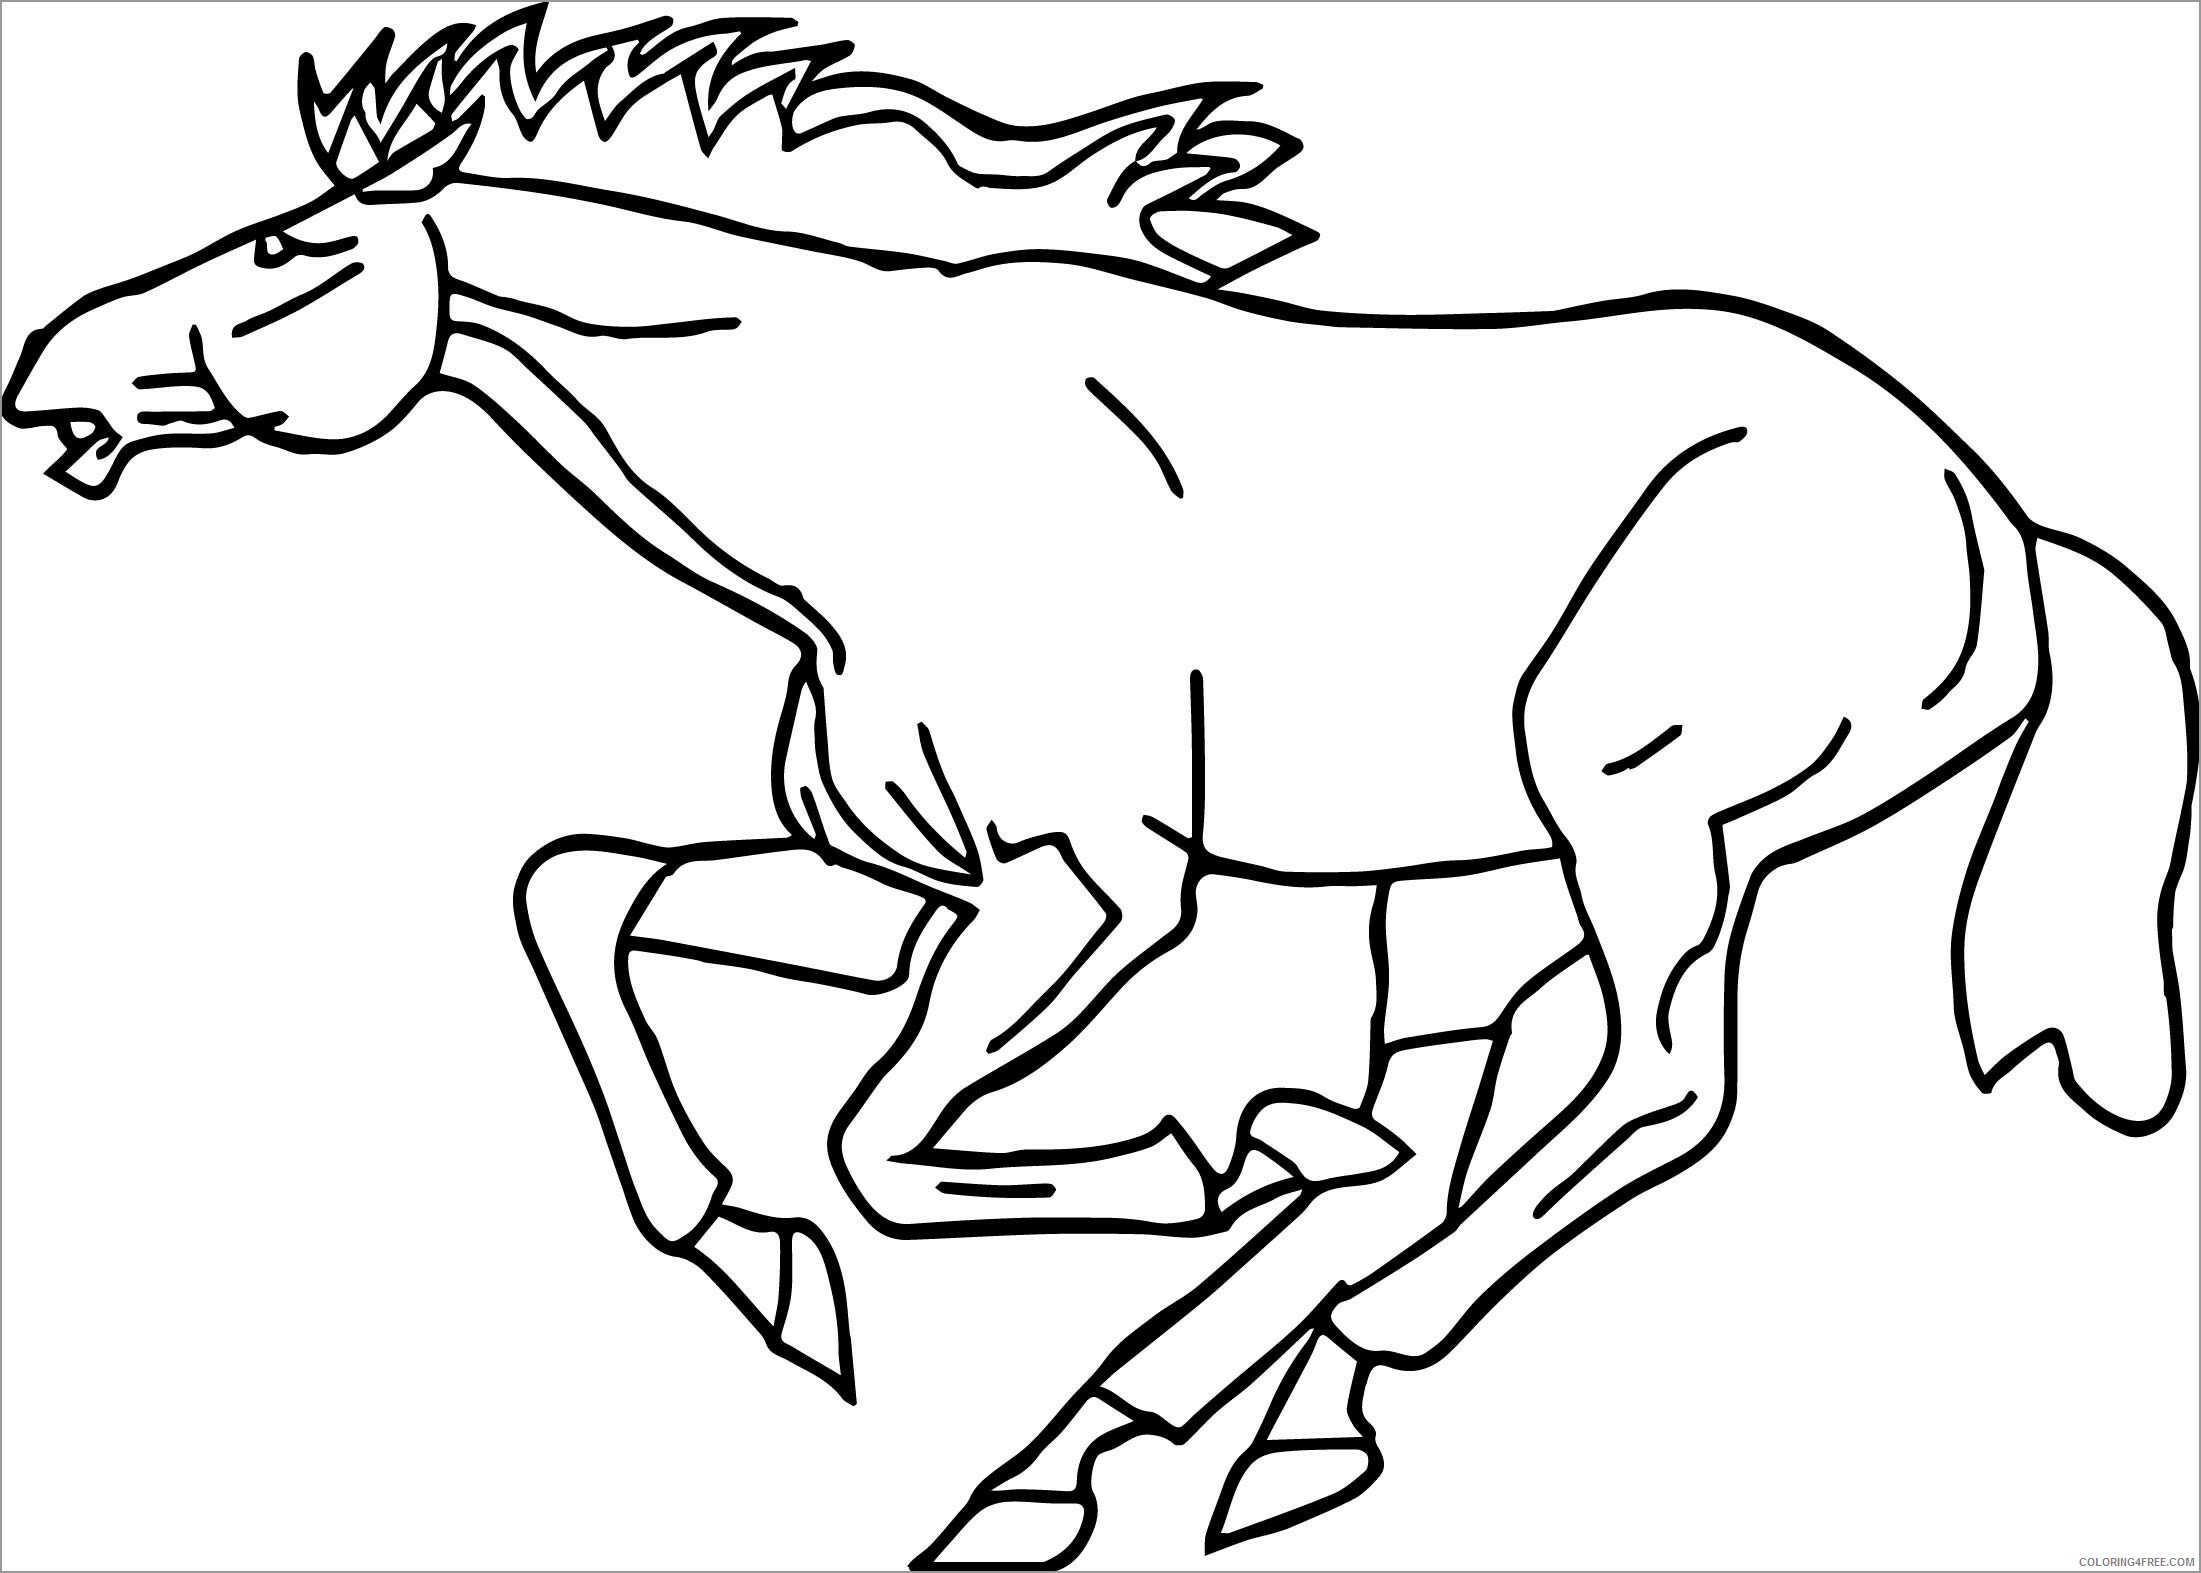 Horses Coloring Pages Animal Printable Sheets horse for kids 2021 2764 Coloring4free